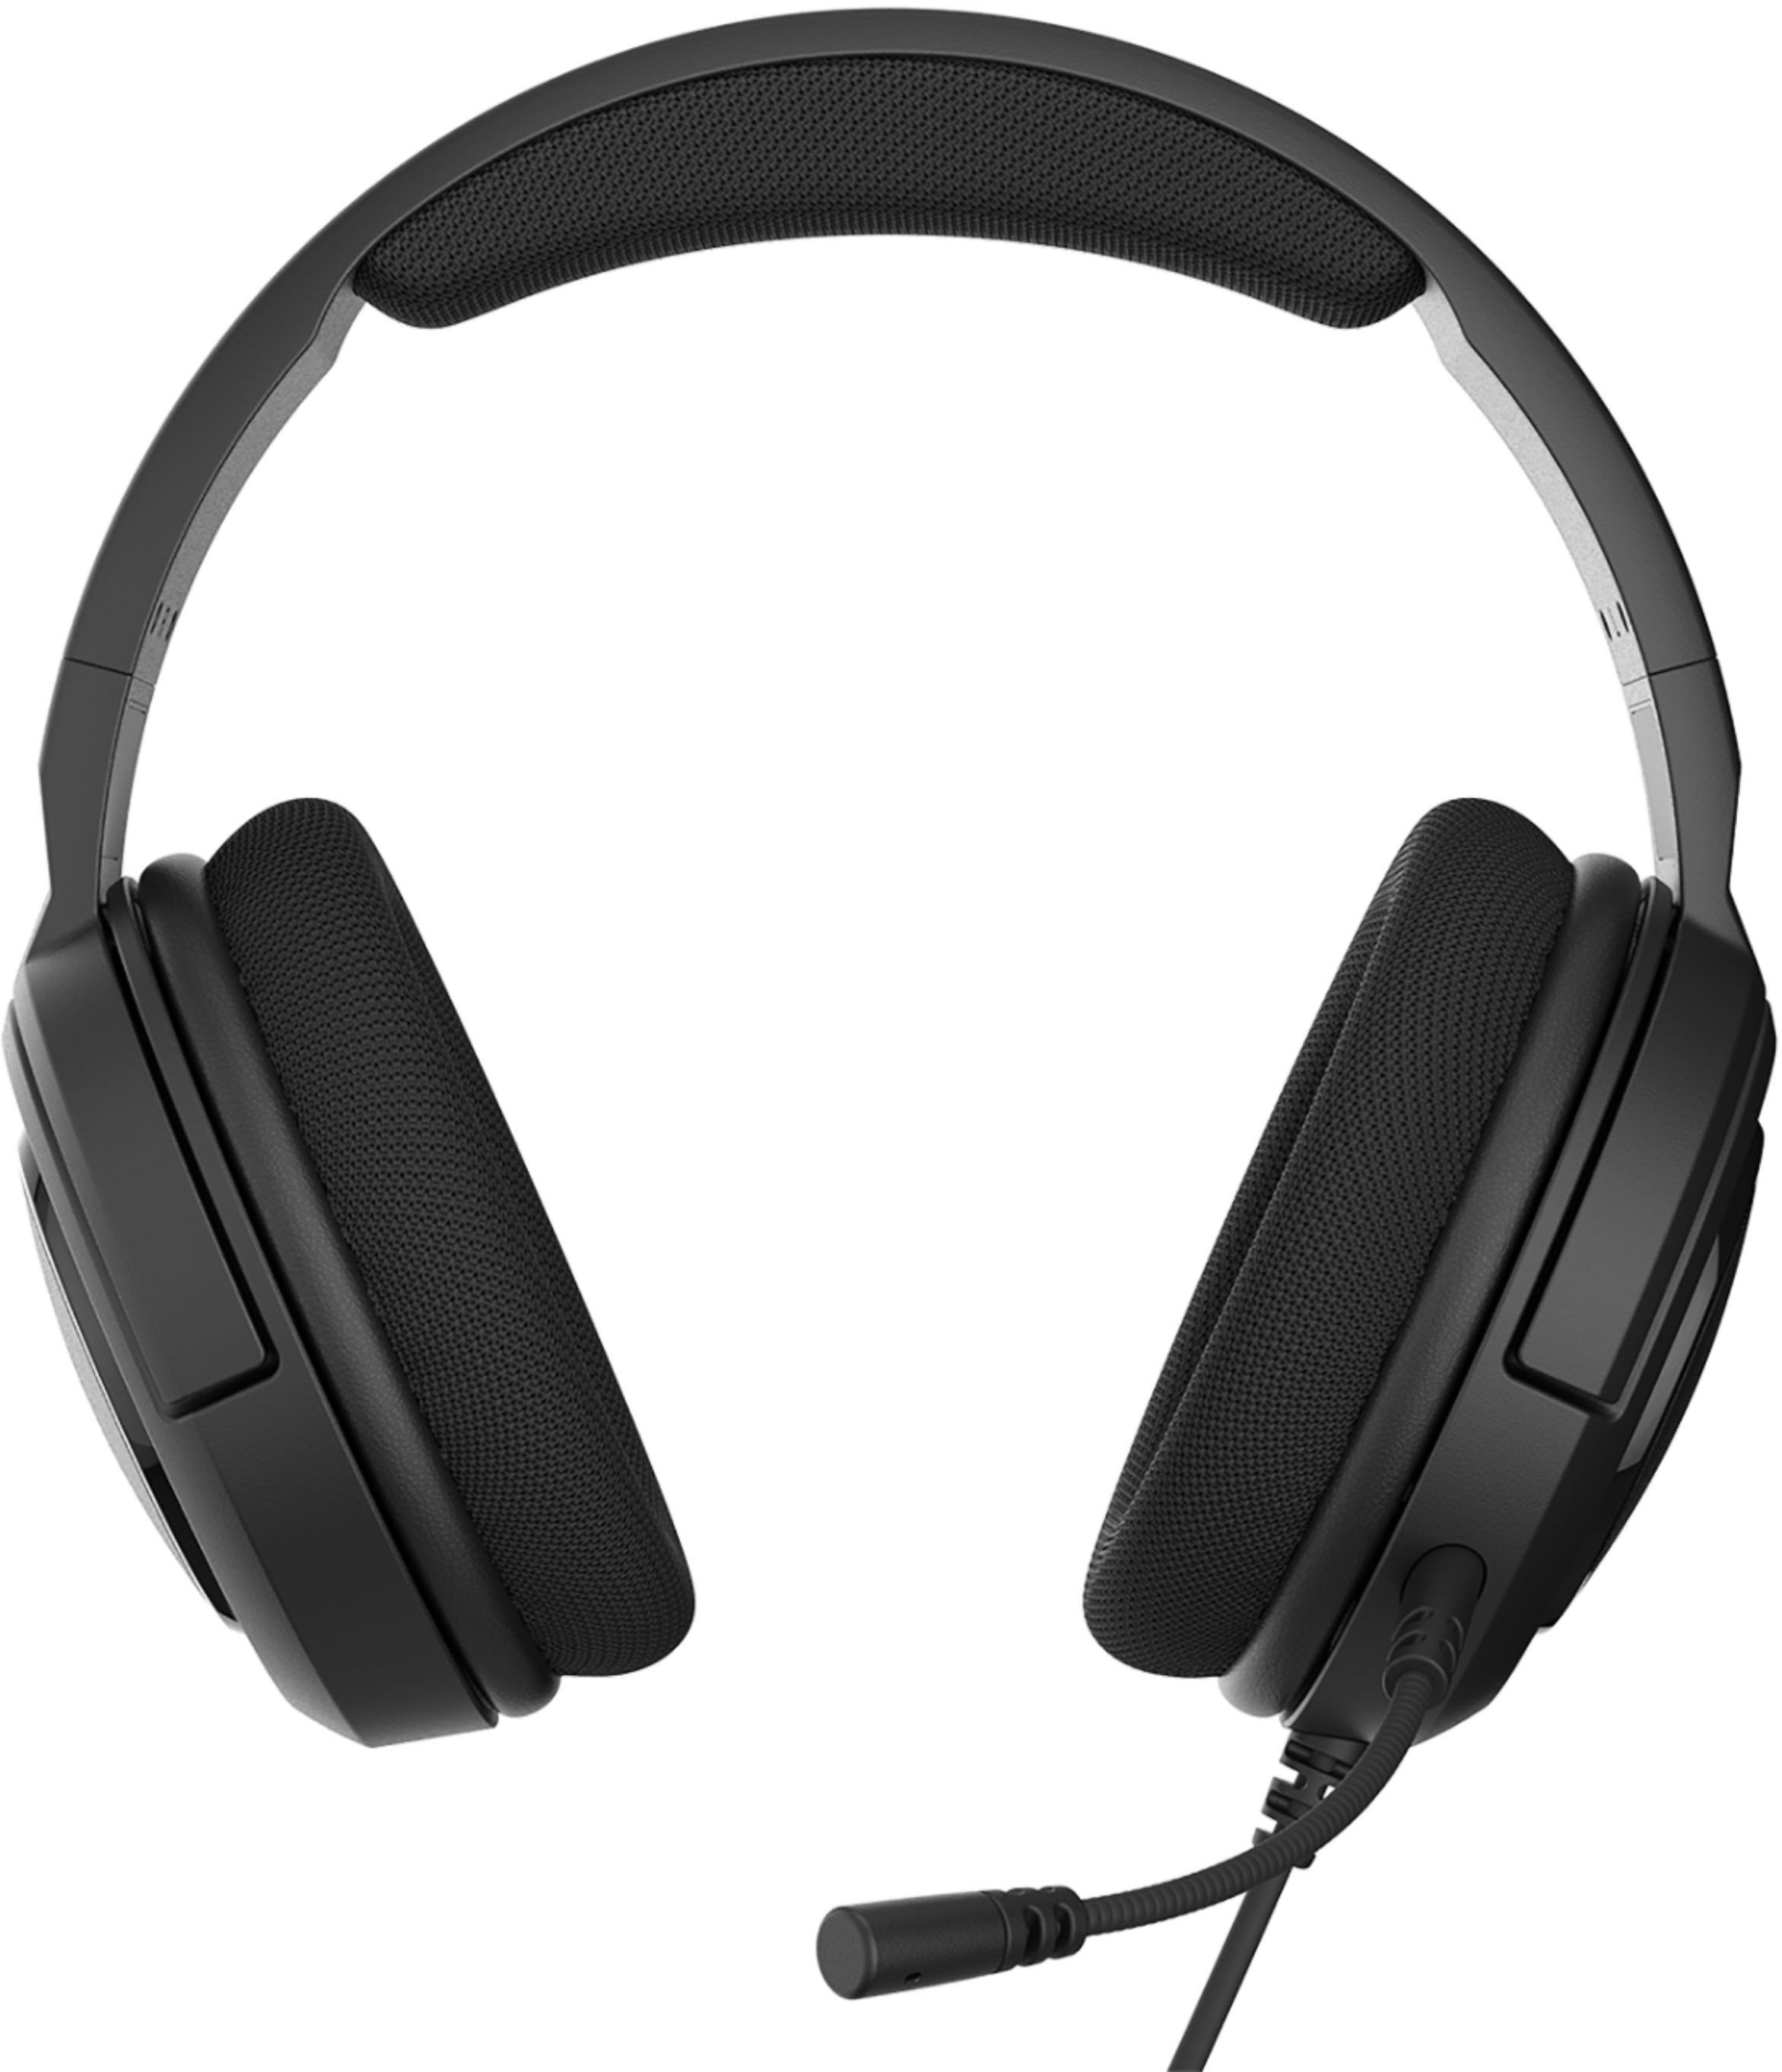 Kanon hack vee Best Buy: CORSAIR HS35 Wired Stereo Gaming Headset Carbon CA-9011195-NA